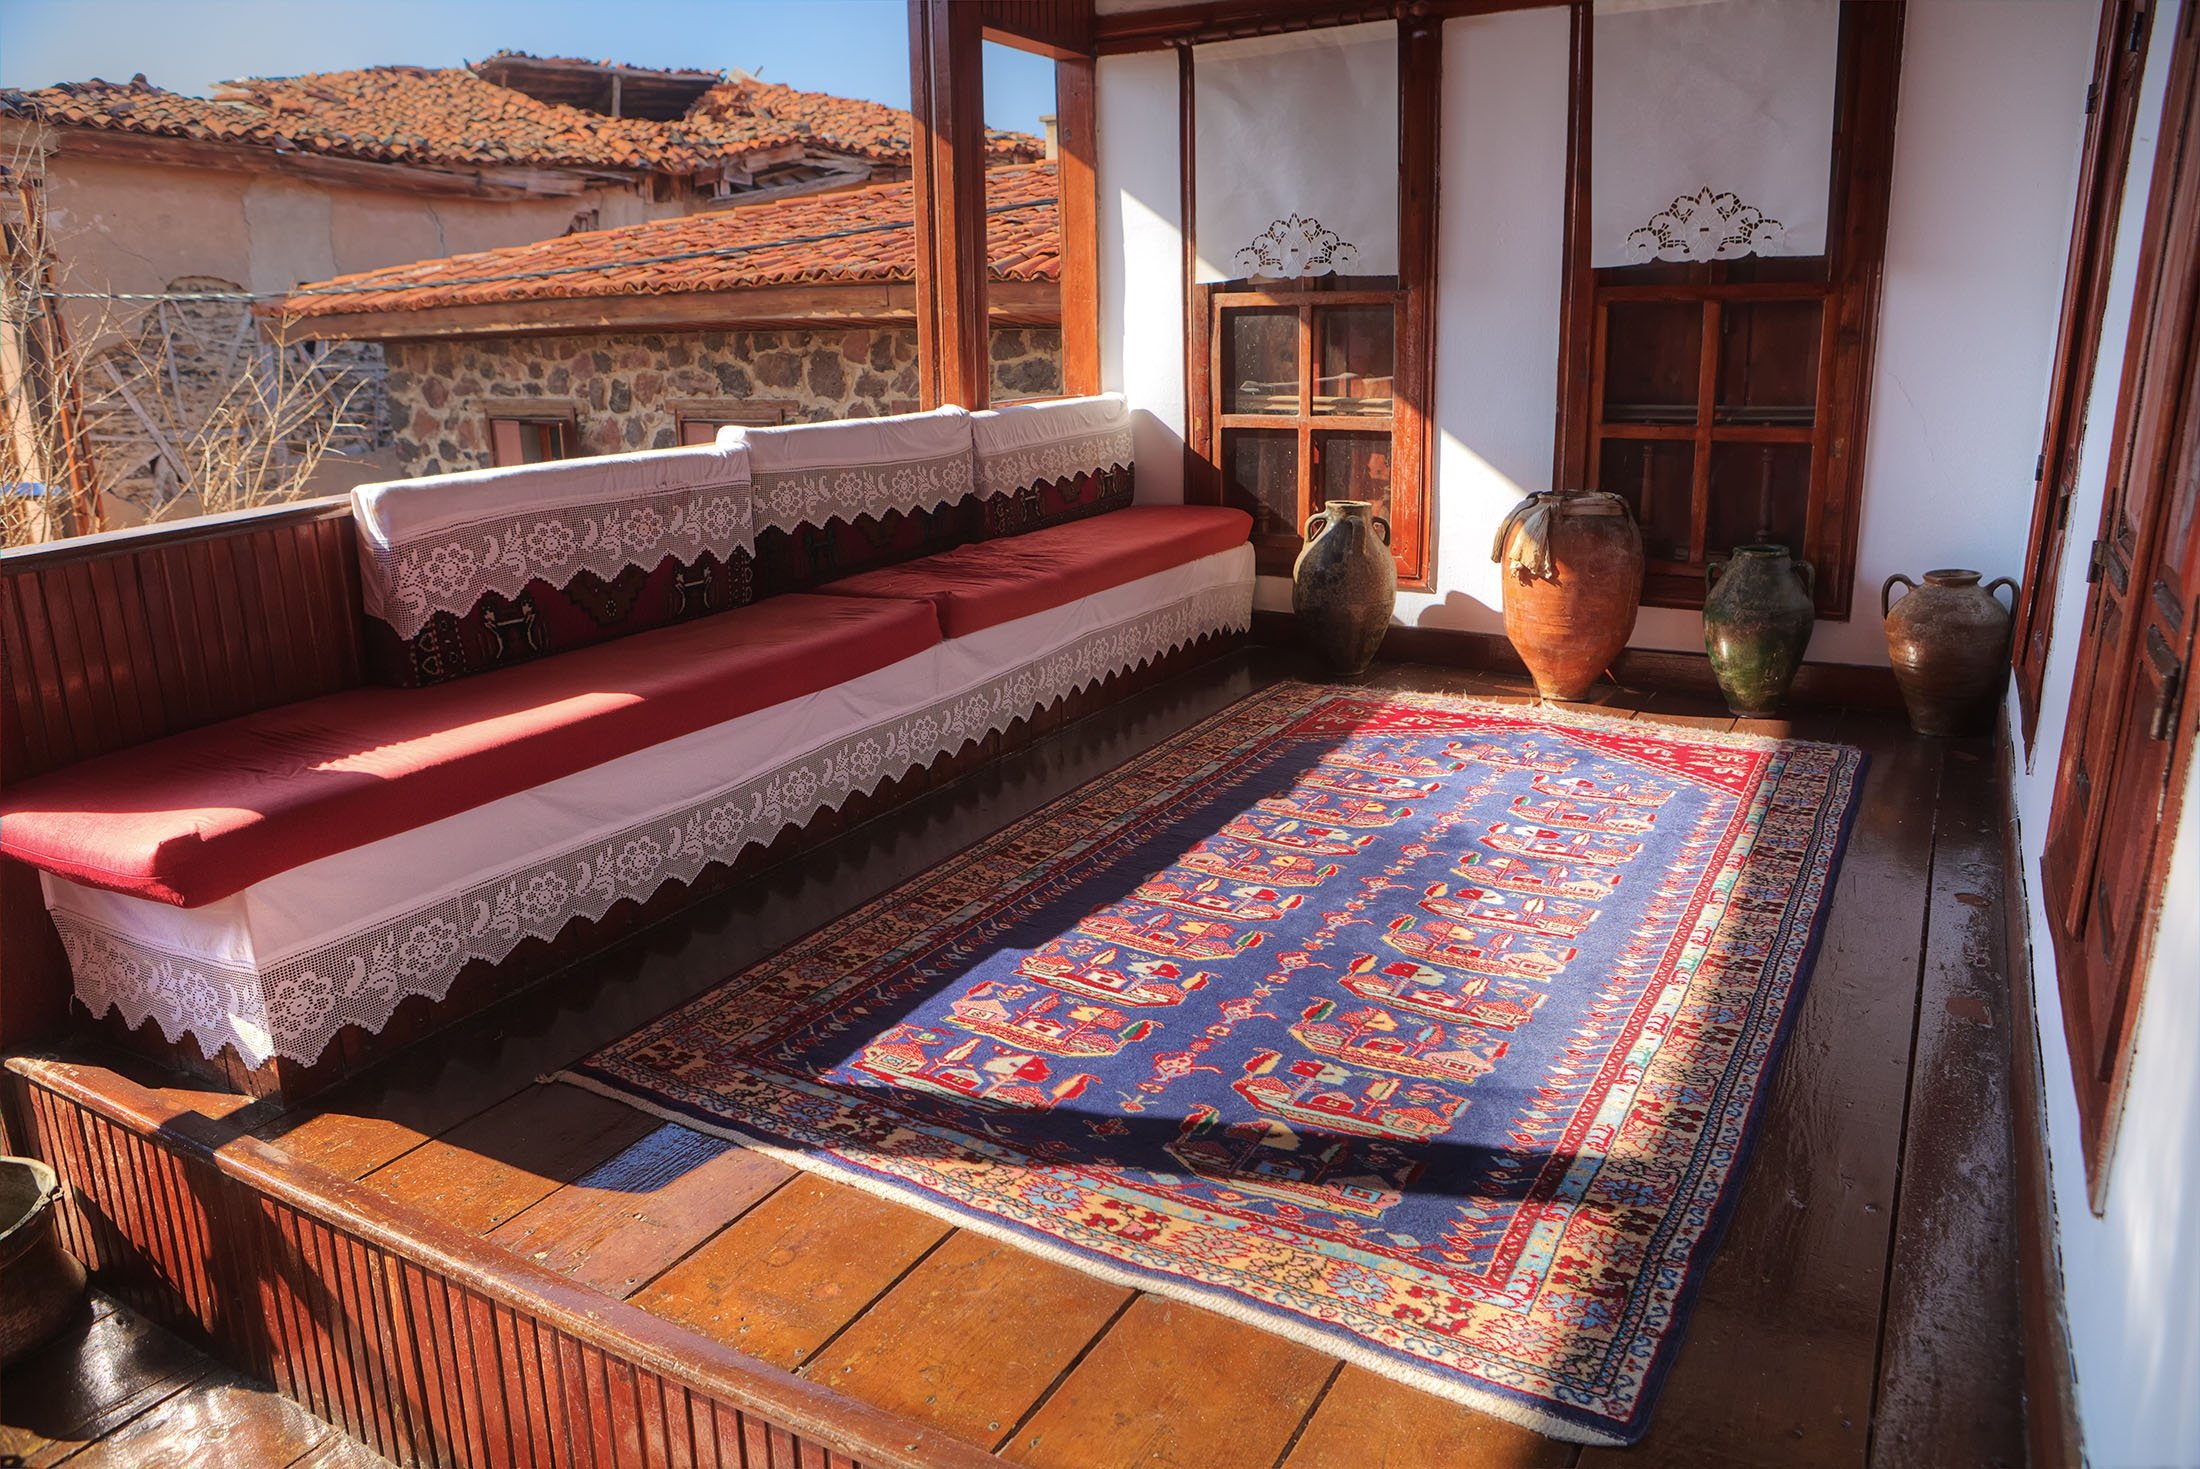 A traditional carpet and the interior of Kula houses in Manisa, Turkey. (Shutterstock Photo)